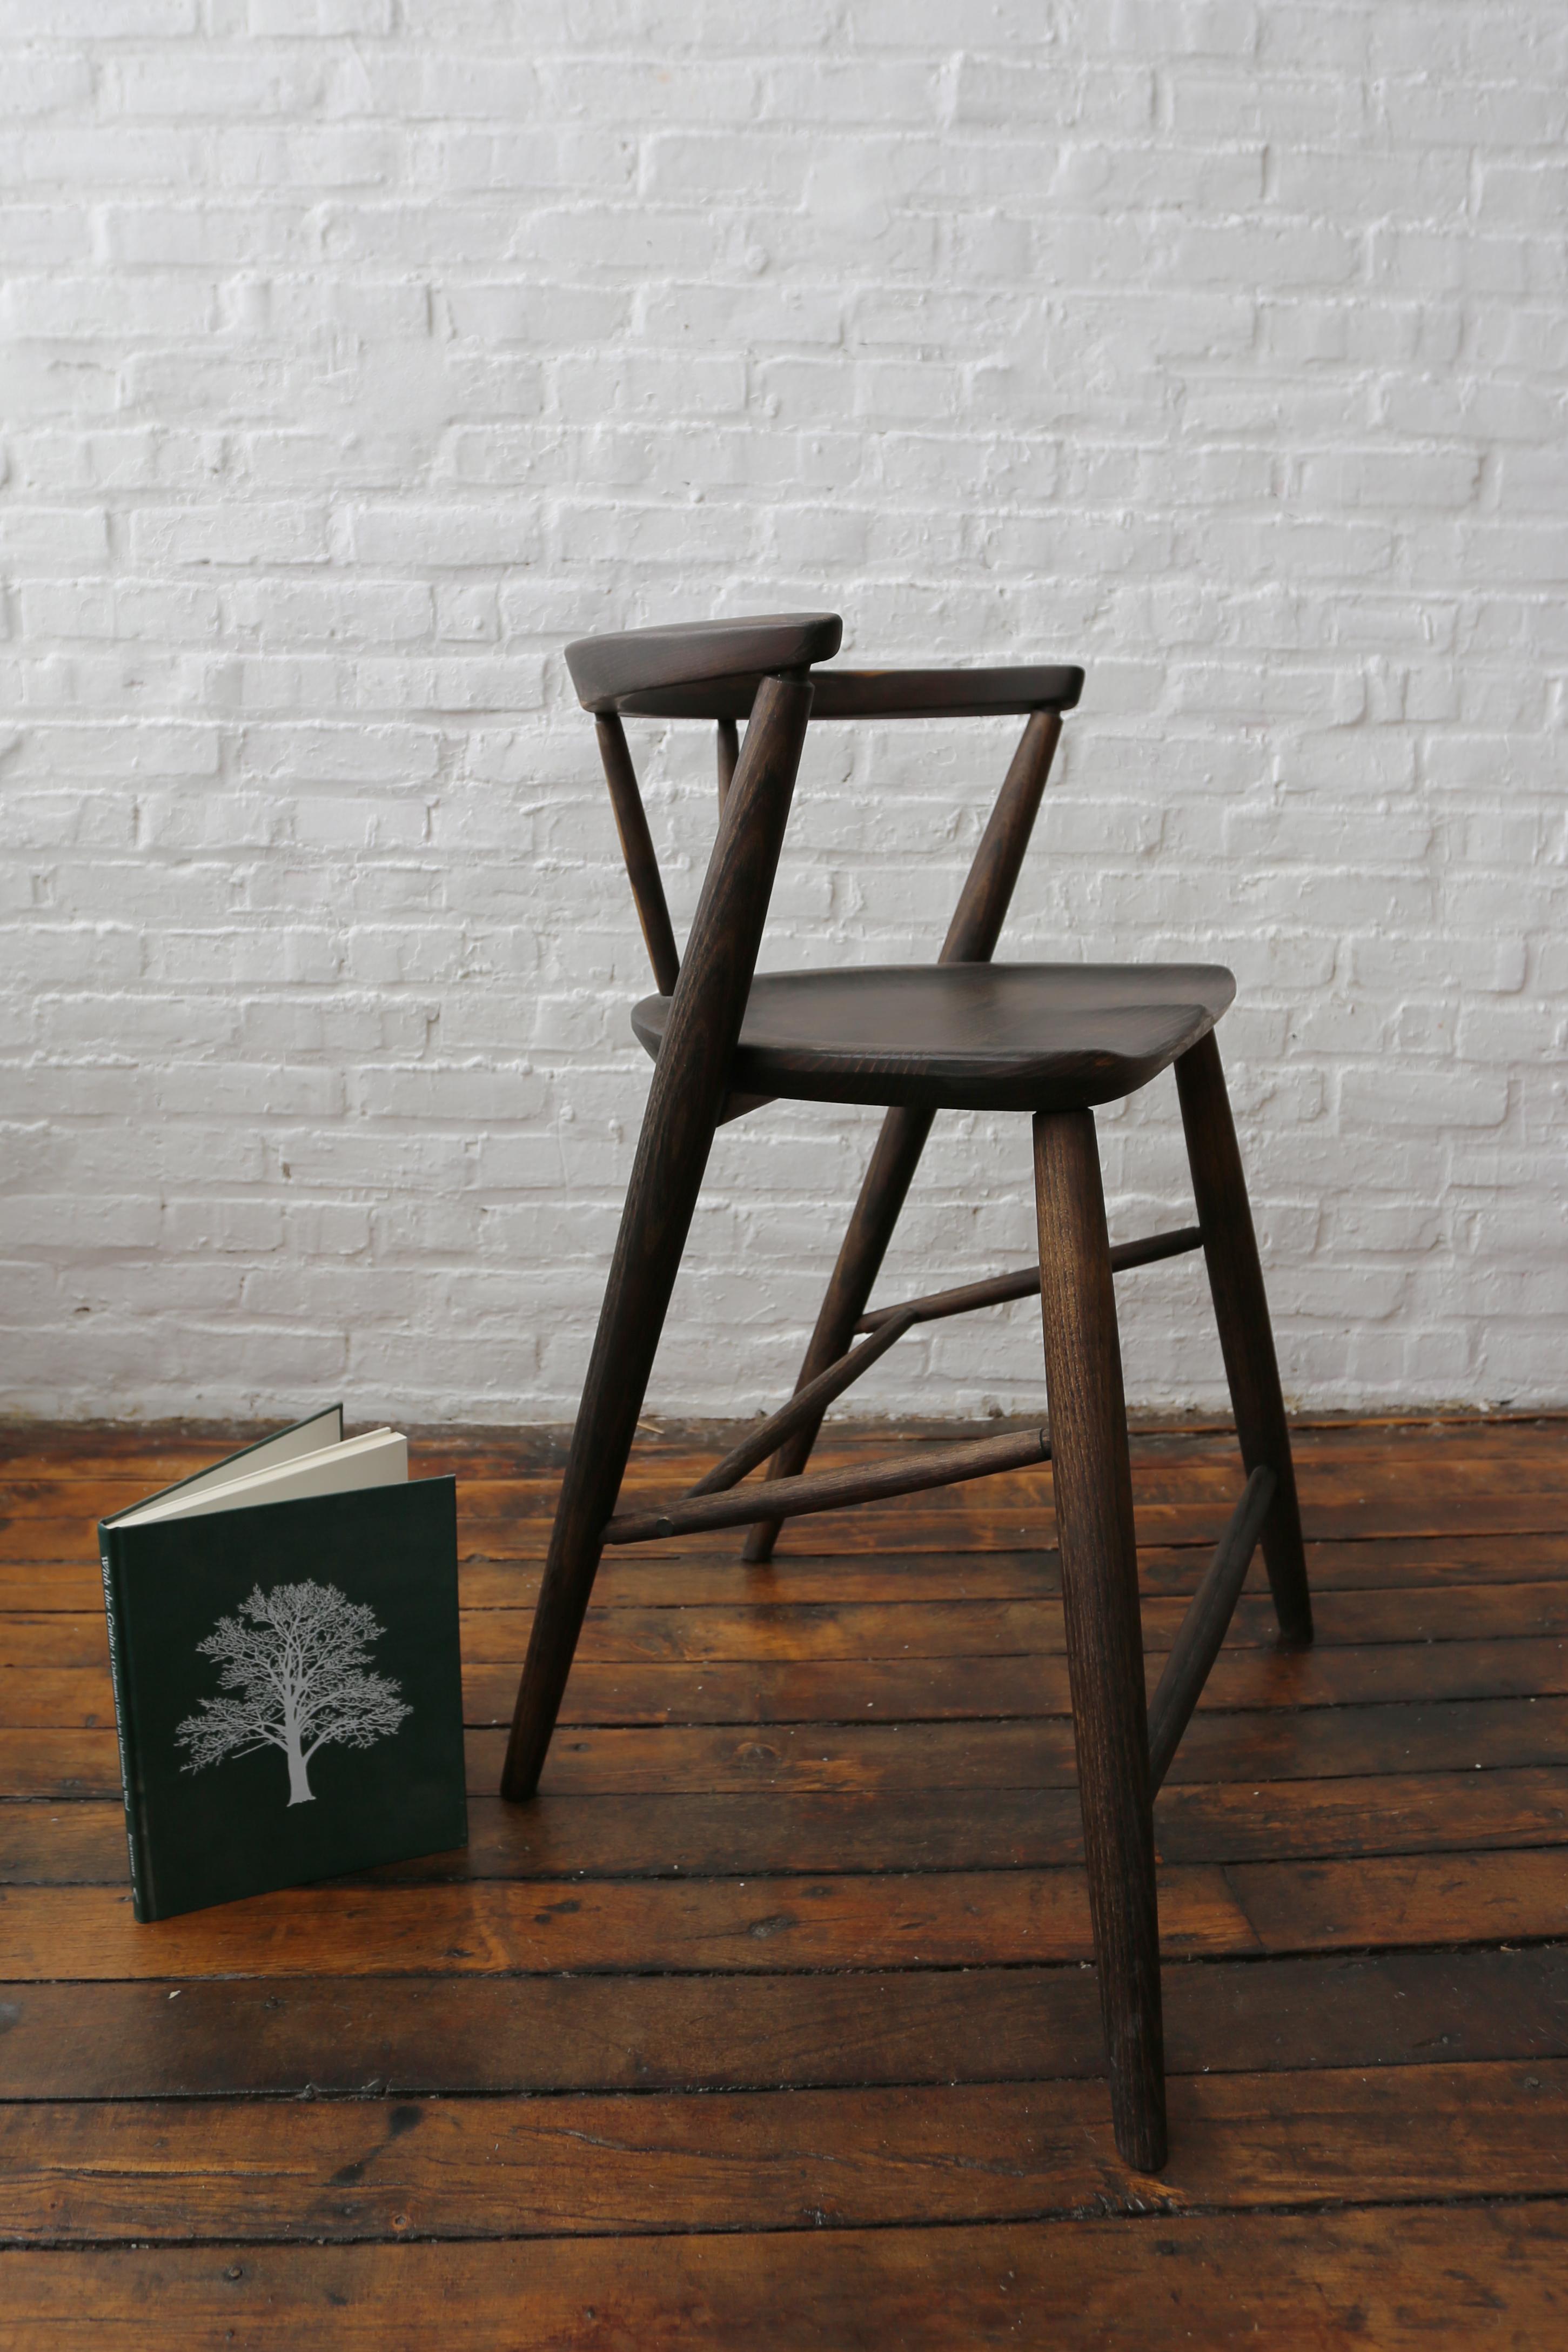 In our newest design we took the essence of our dining chair and adapted it into a counter height stool. The design draws the eye up the long tapered leg, to the soft curve of the back, giving a striking and sultry effect. The foot rest and arm